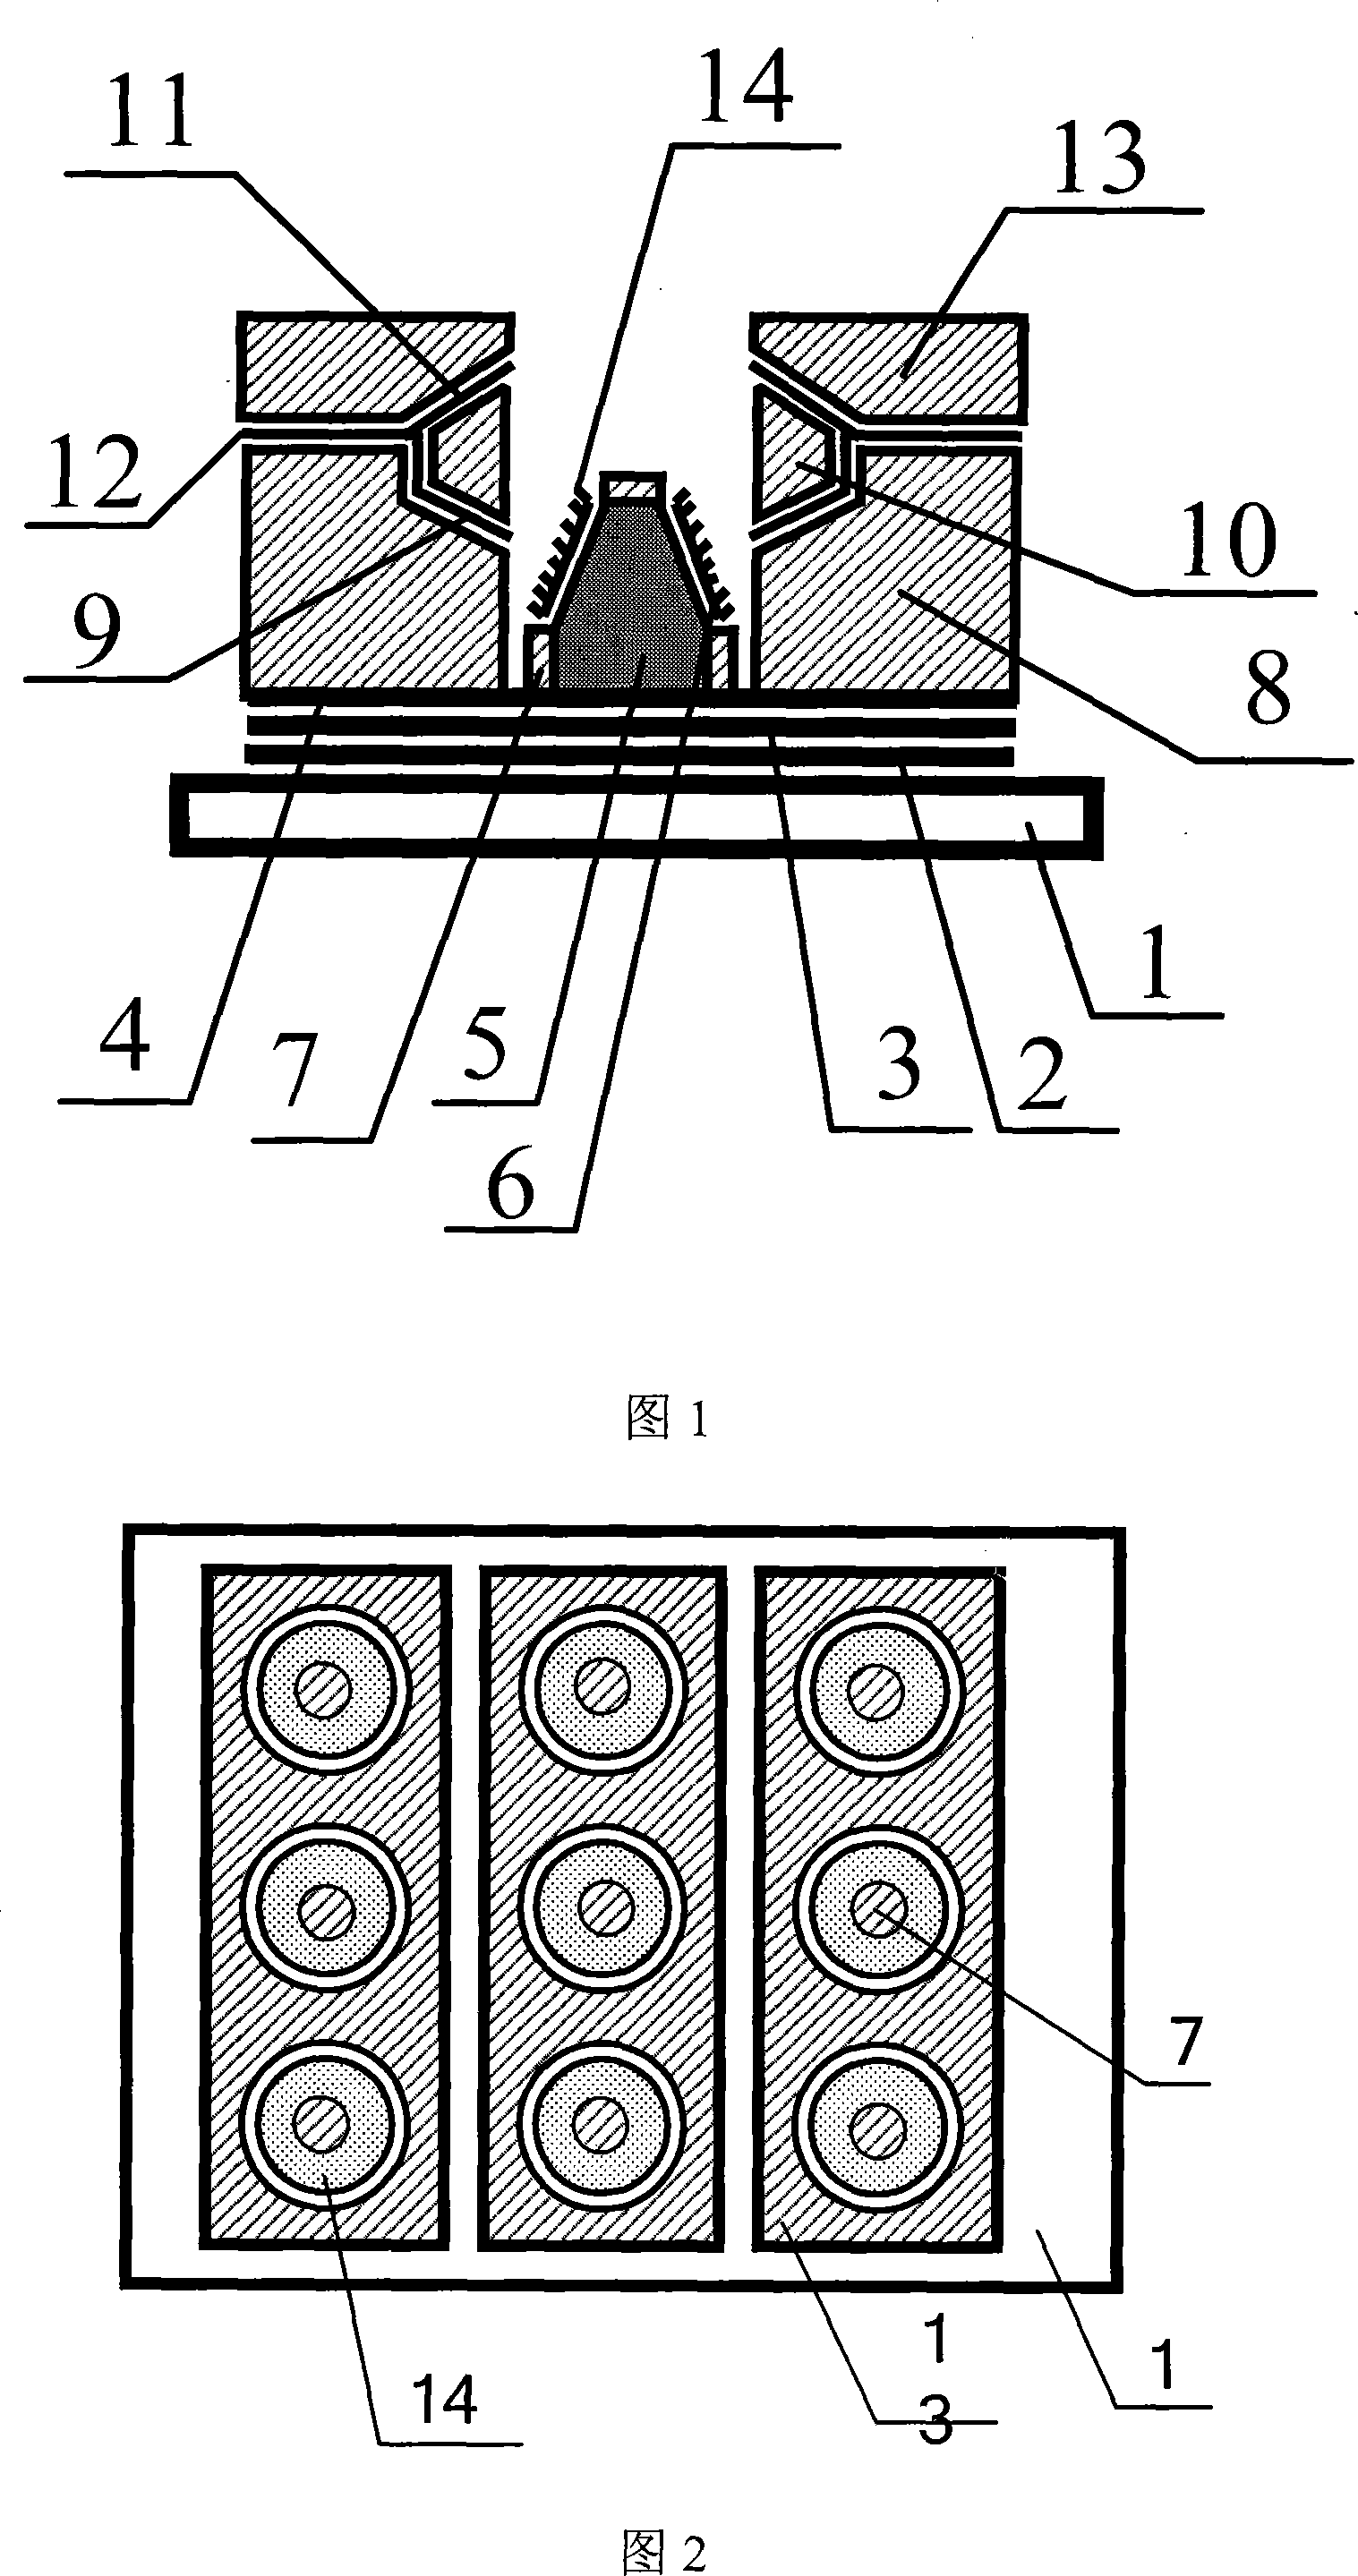 Flat panel display with bevelled grid controlled cathode structure in truncated cone form, and fabricating technique